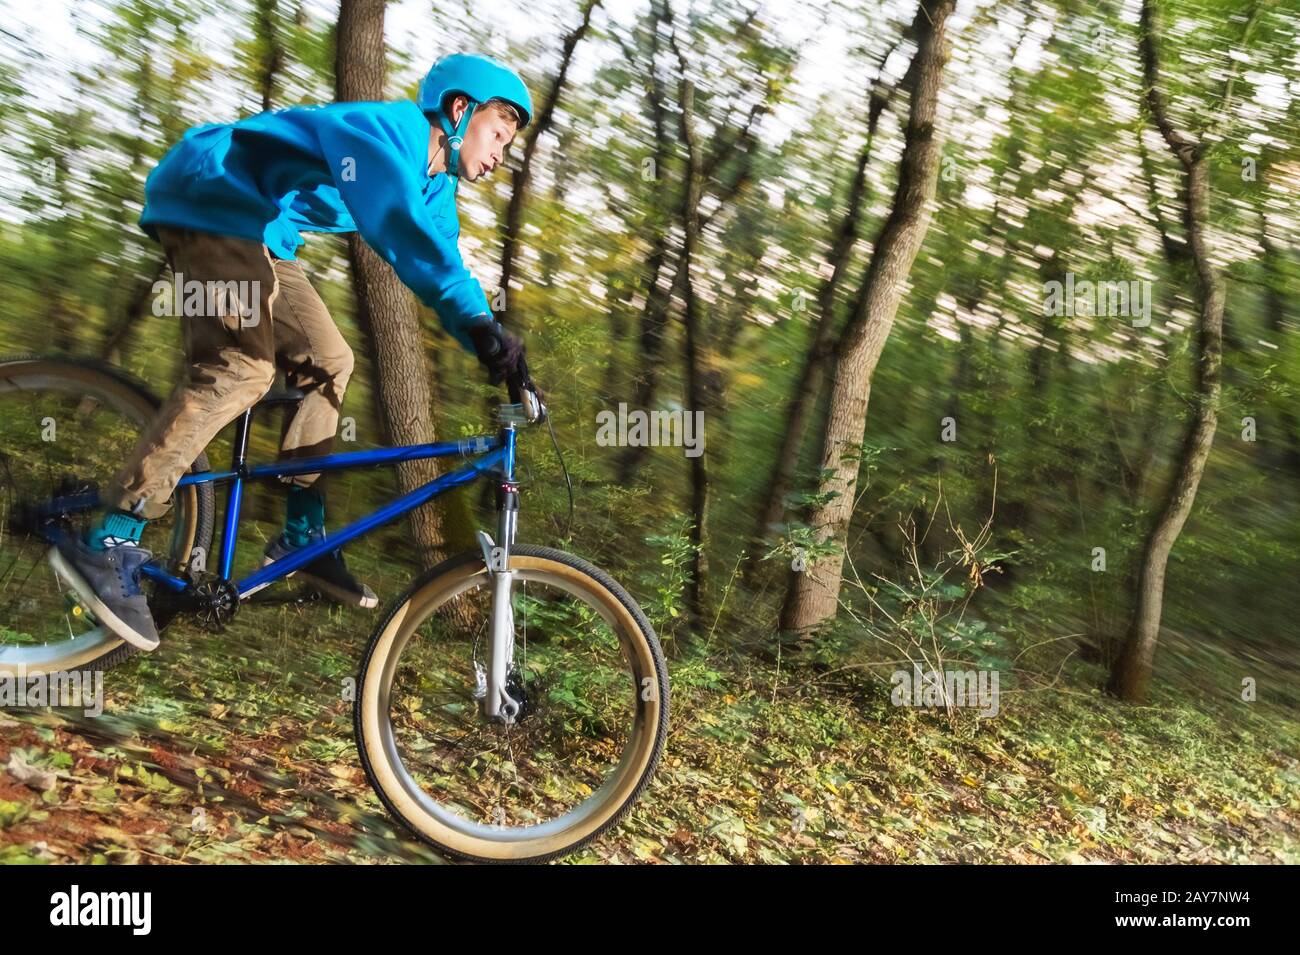 a young guy in a helmet flies landed on a bicycle after jumping from a kicker Stock Photo